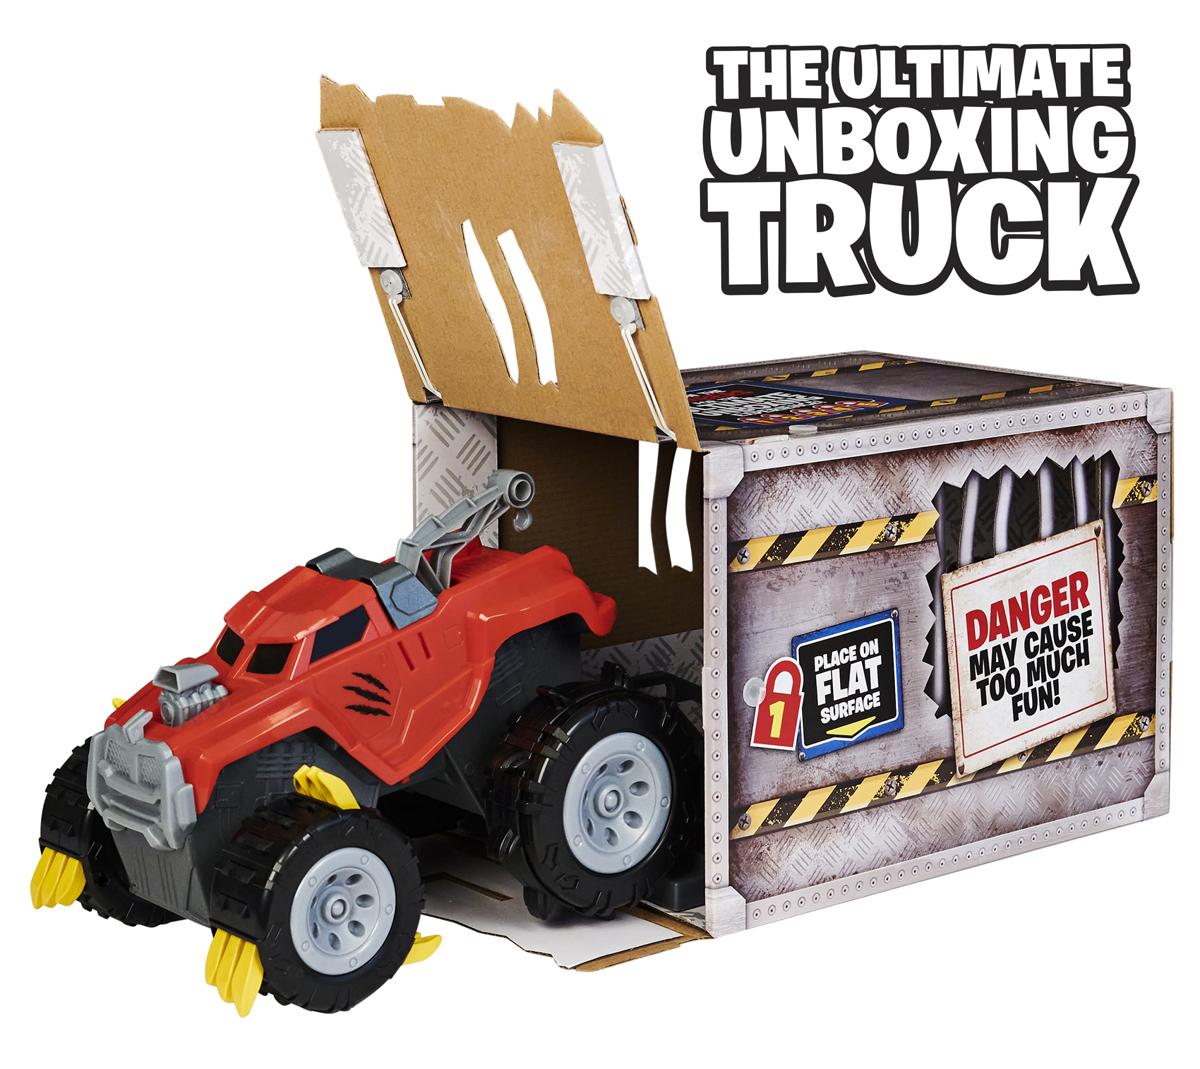 The Animal Interactive Unboxing Toy Truck for $9